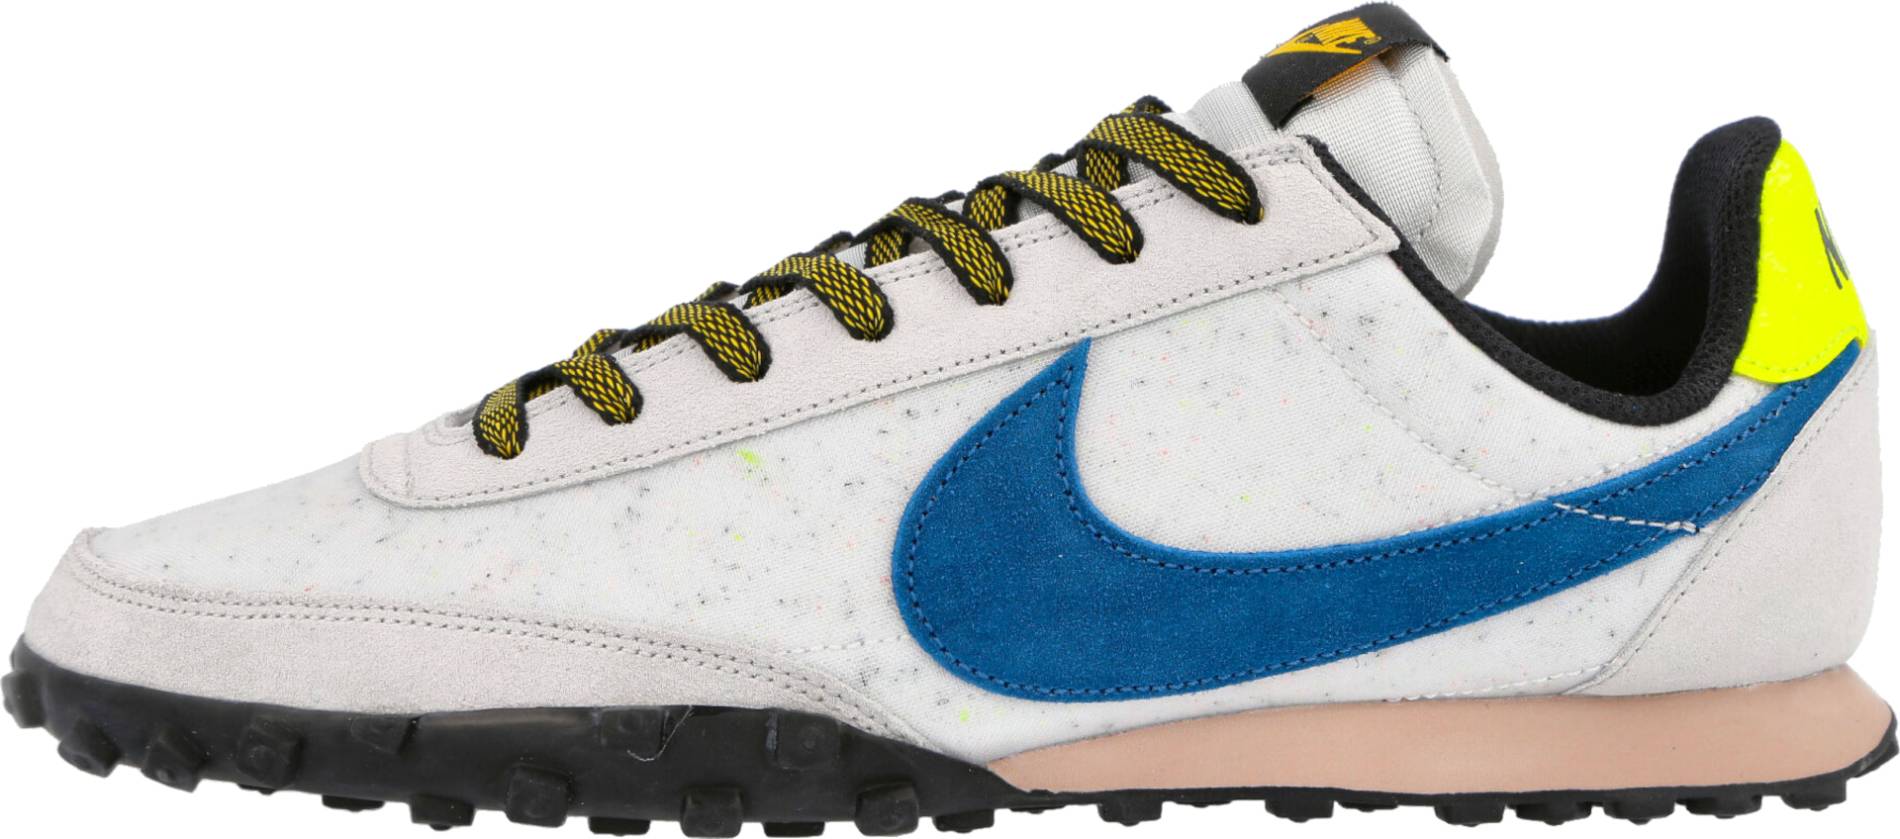 Nike white nike waffle racer Waffle Racer sneakers in 5 colors (only $30) | RunRepeat